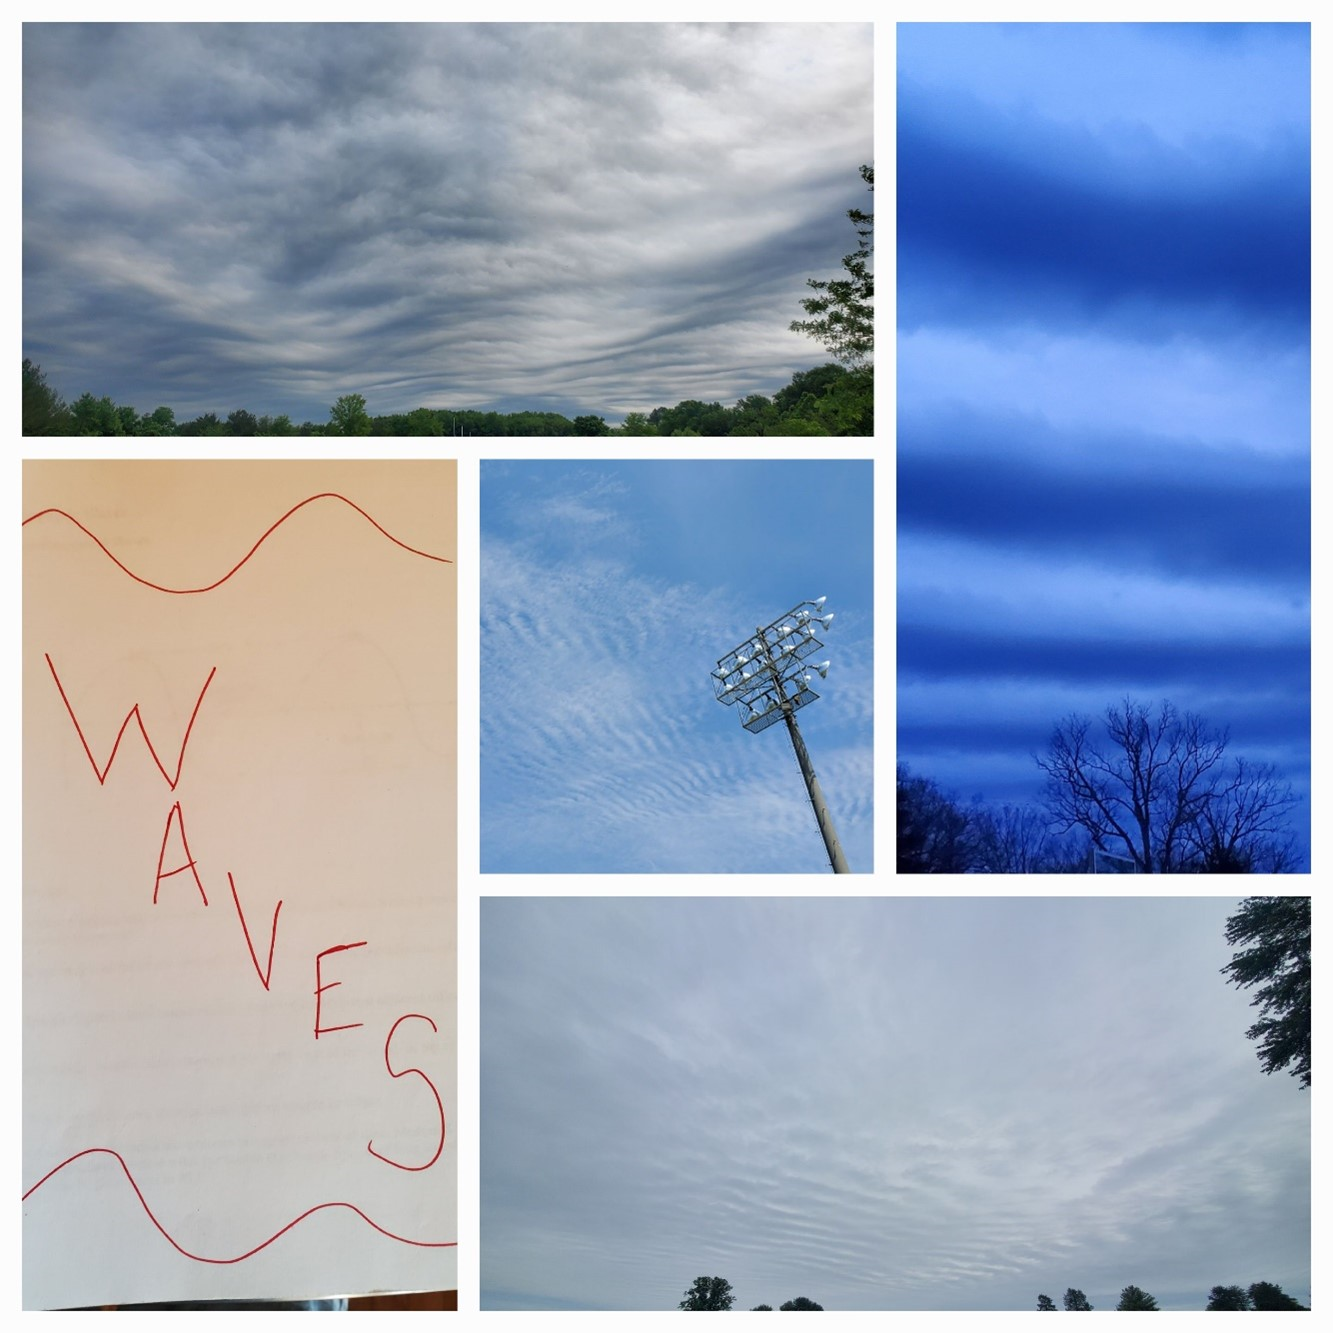 Figure 1: Various stable waves made visible by different cloud types. The random picture of the word “waves” came from my Synoptic Meteorology undergraduate notebook further illustrating atmospheric business via waves.